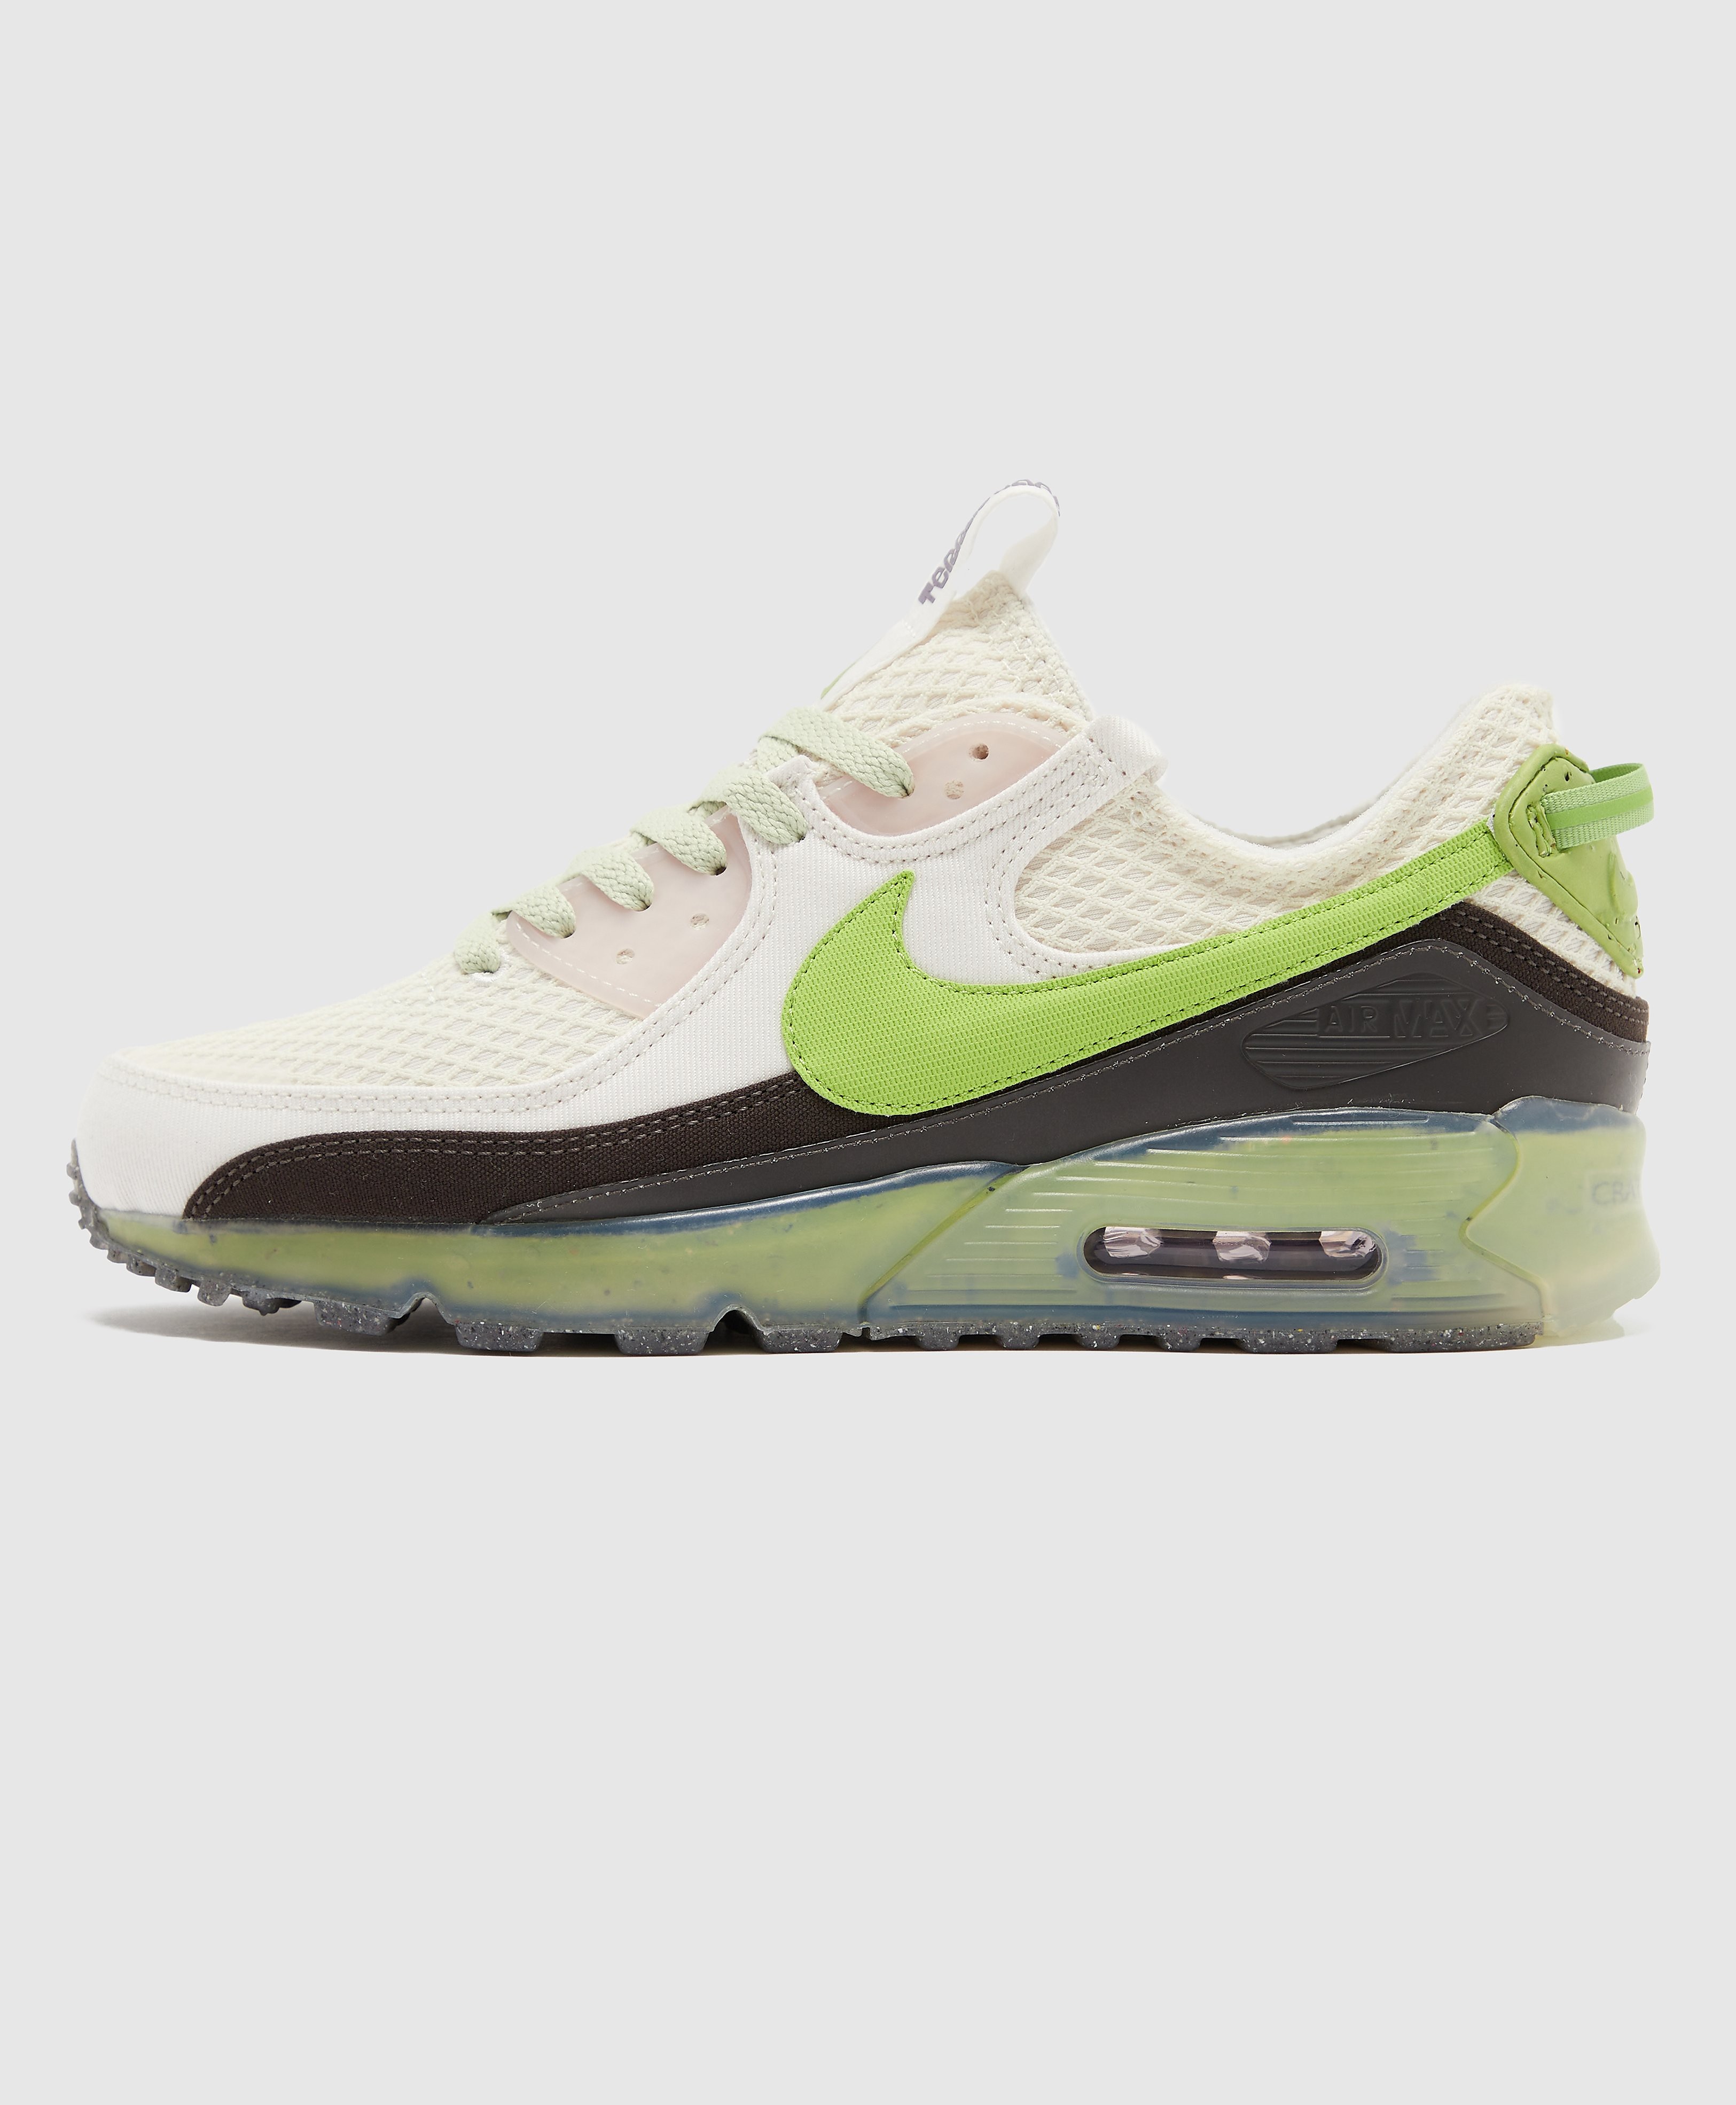 Nike Men's Air Max 90 Terrascape Trainers - White/Olive, White/Olive